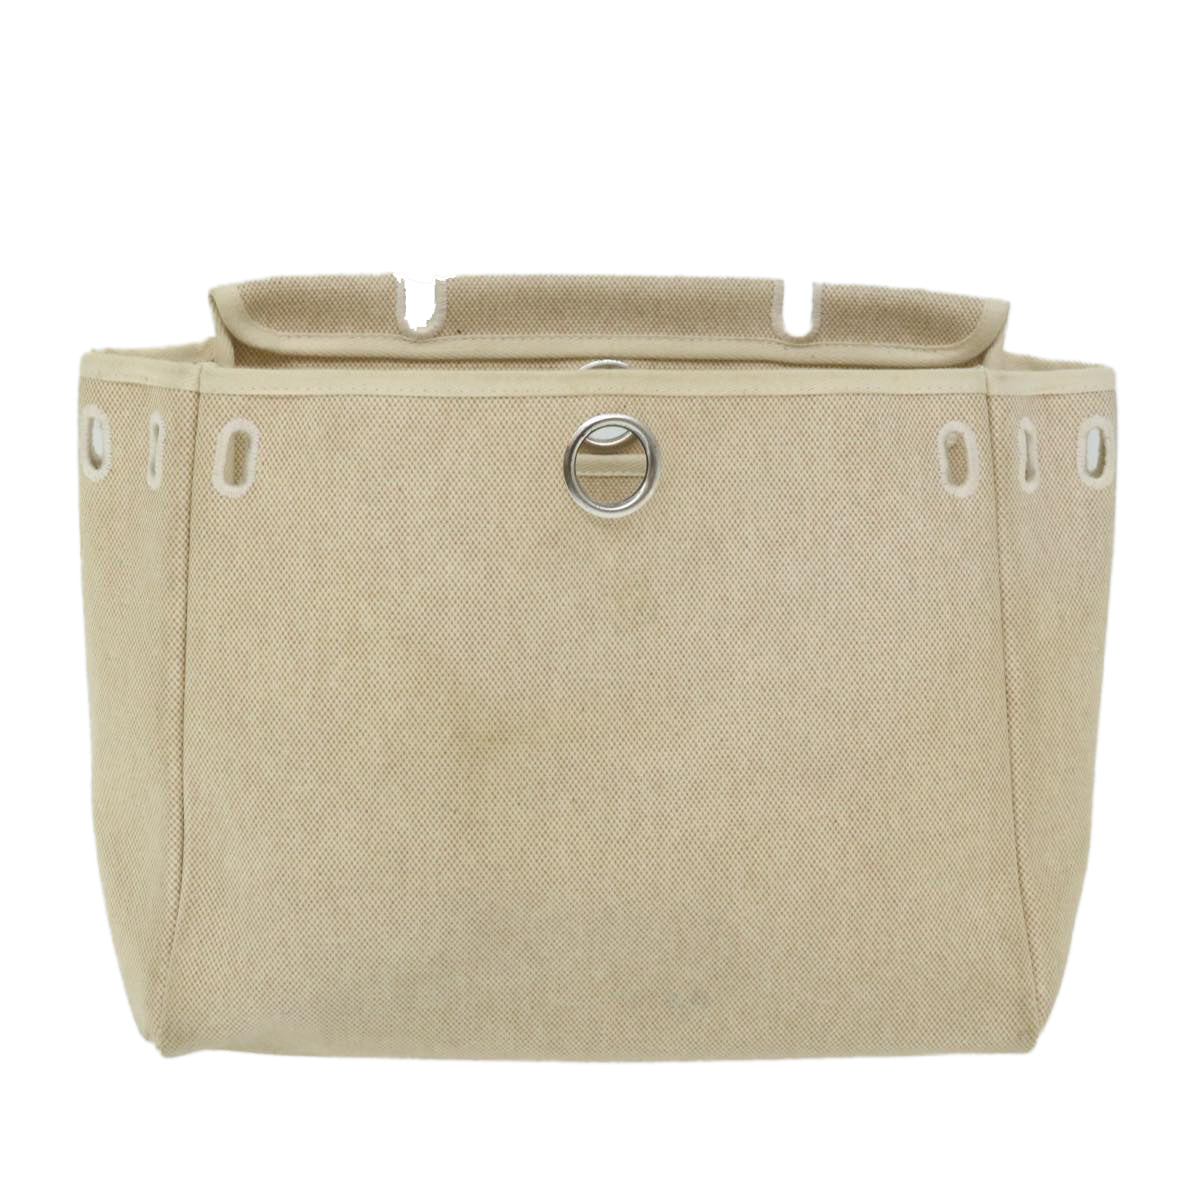 HERMES Her Bag PM Hand Bag Coated Canvas Beige Auth am5622